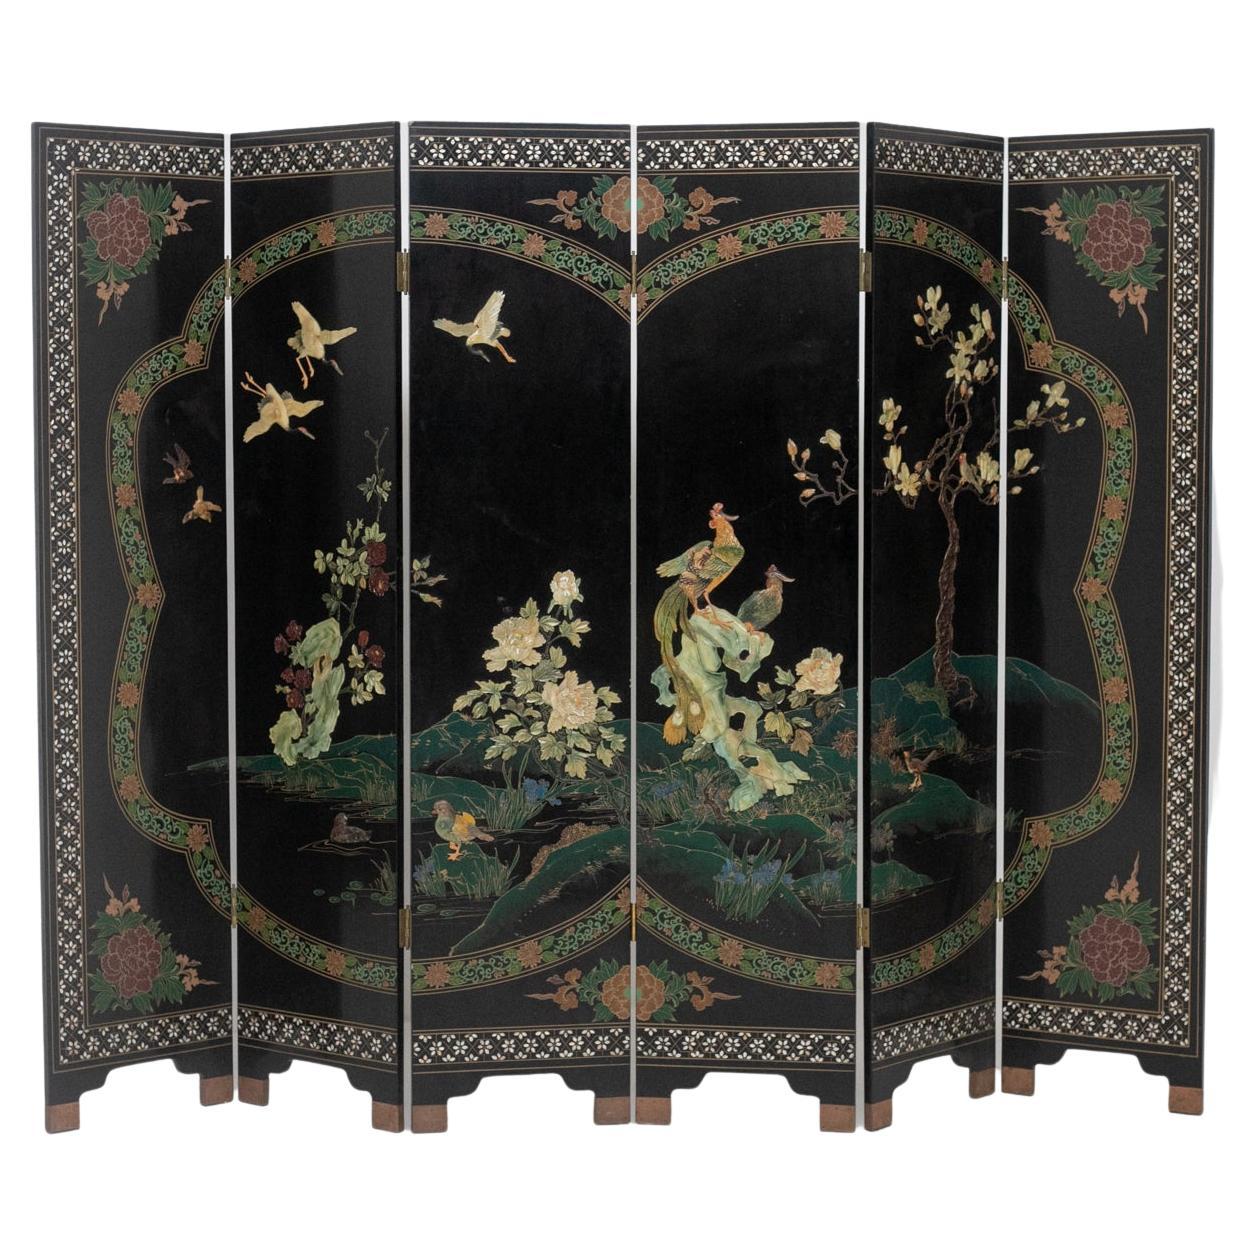 Chinese Lacquered Wood Screen with Inlaid Stones